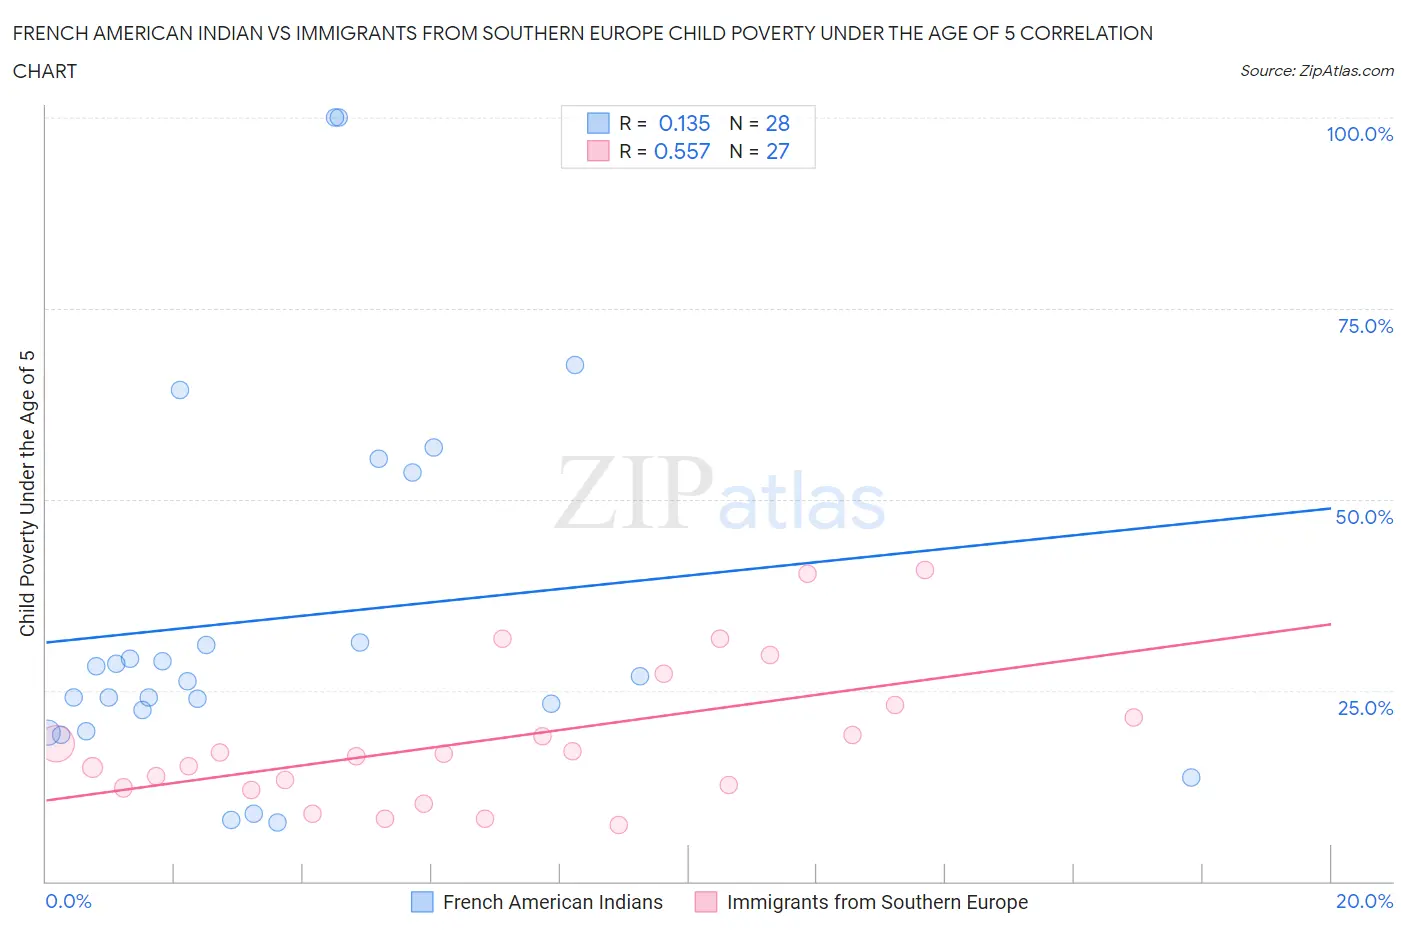 French American Indian vs Immigrants from Southern Europe Child Poverty Under the Age of 5